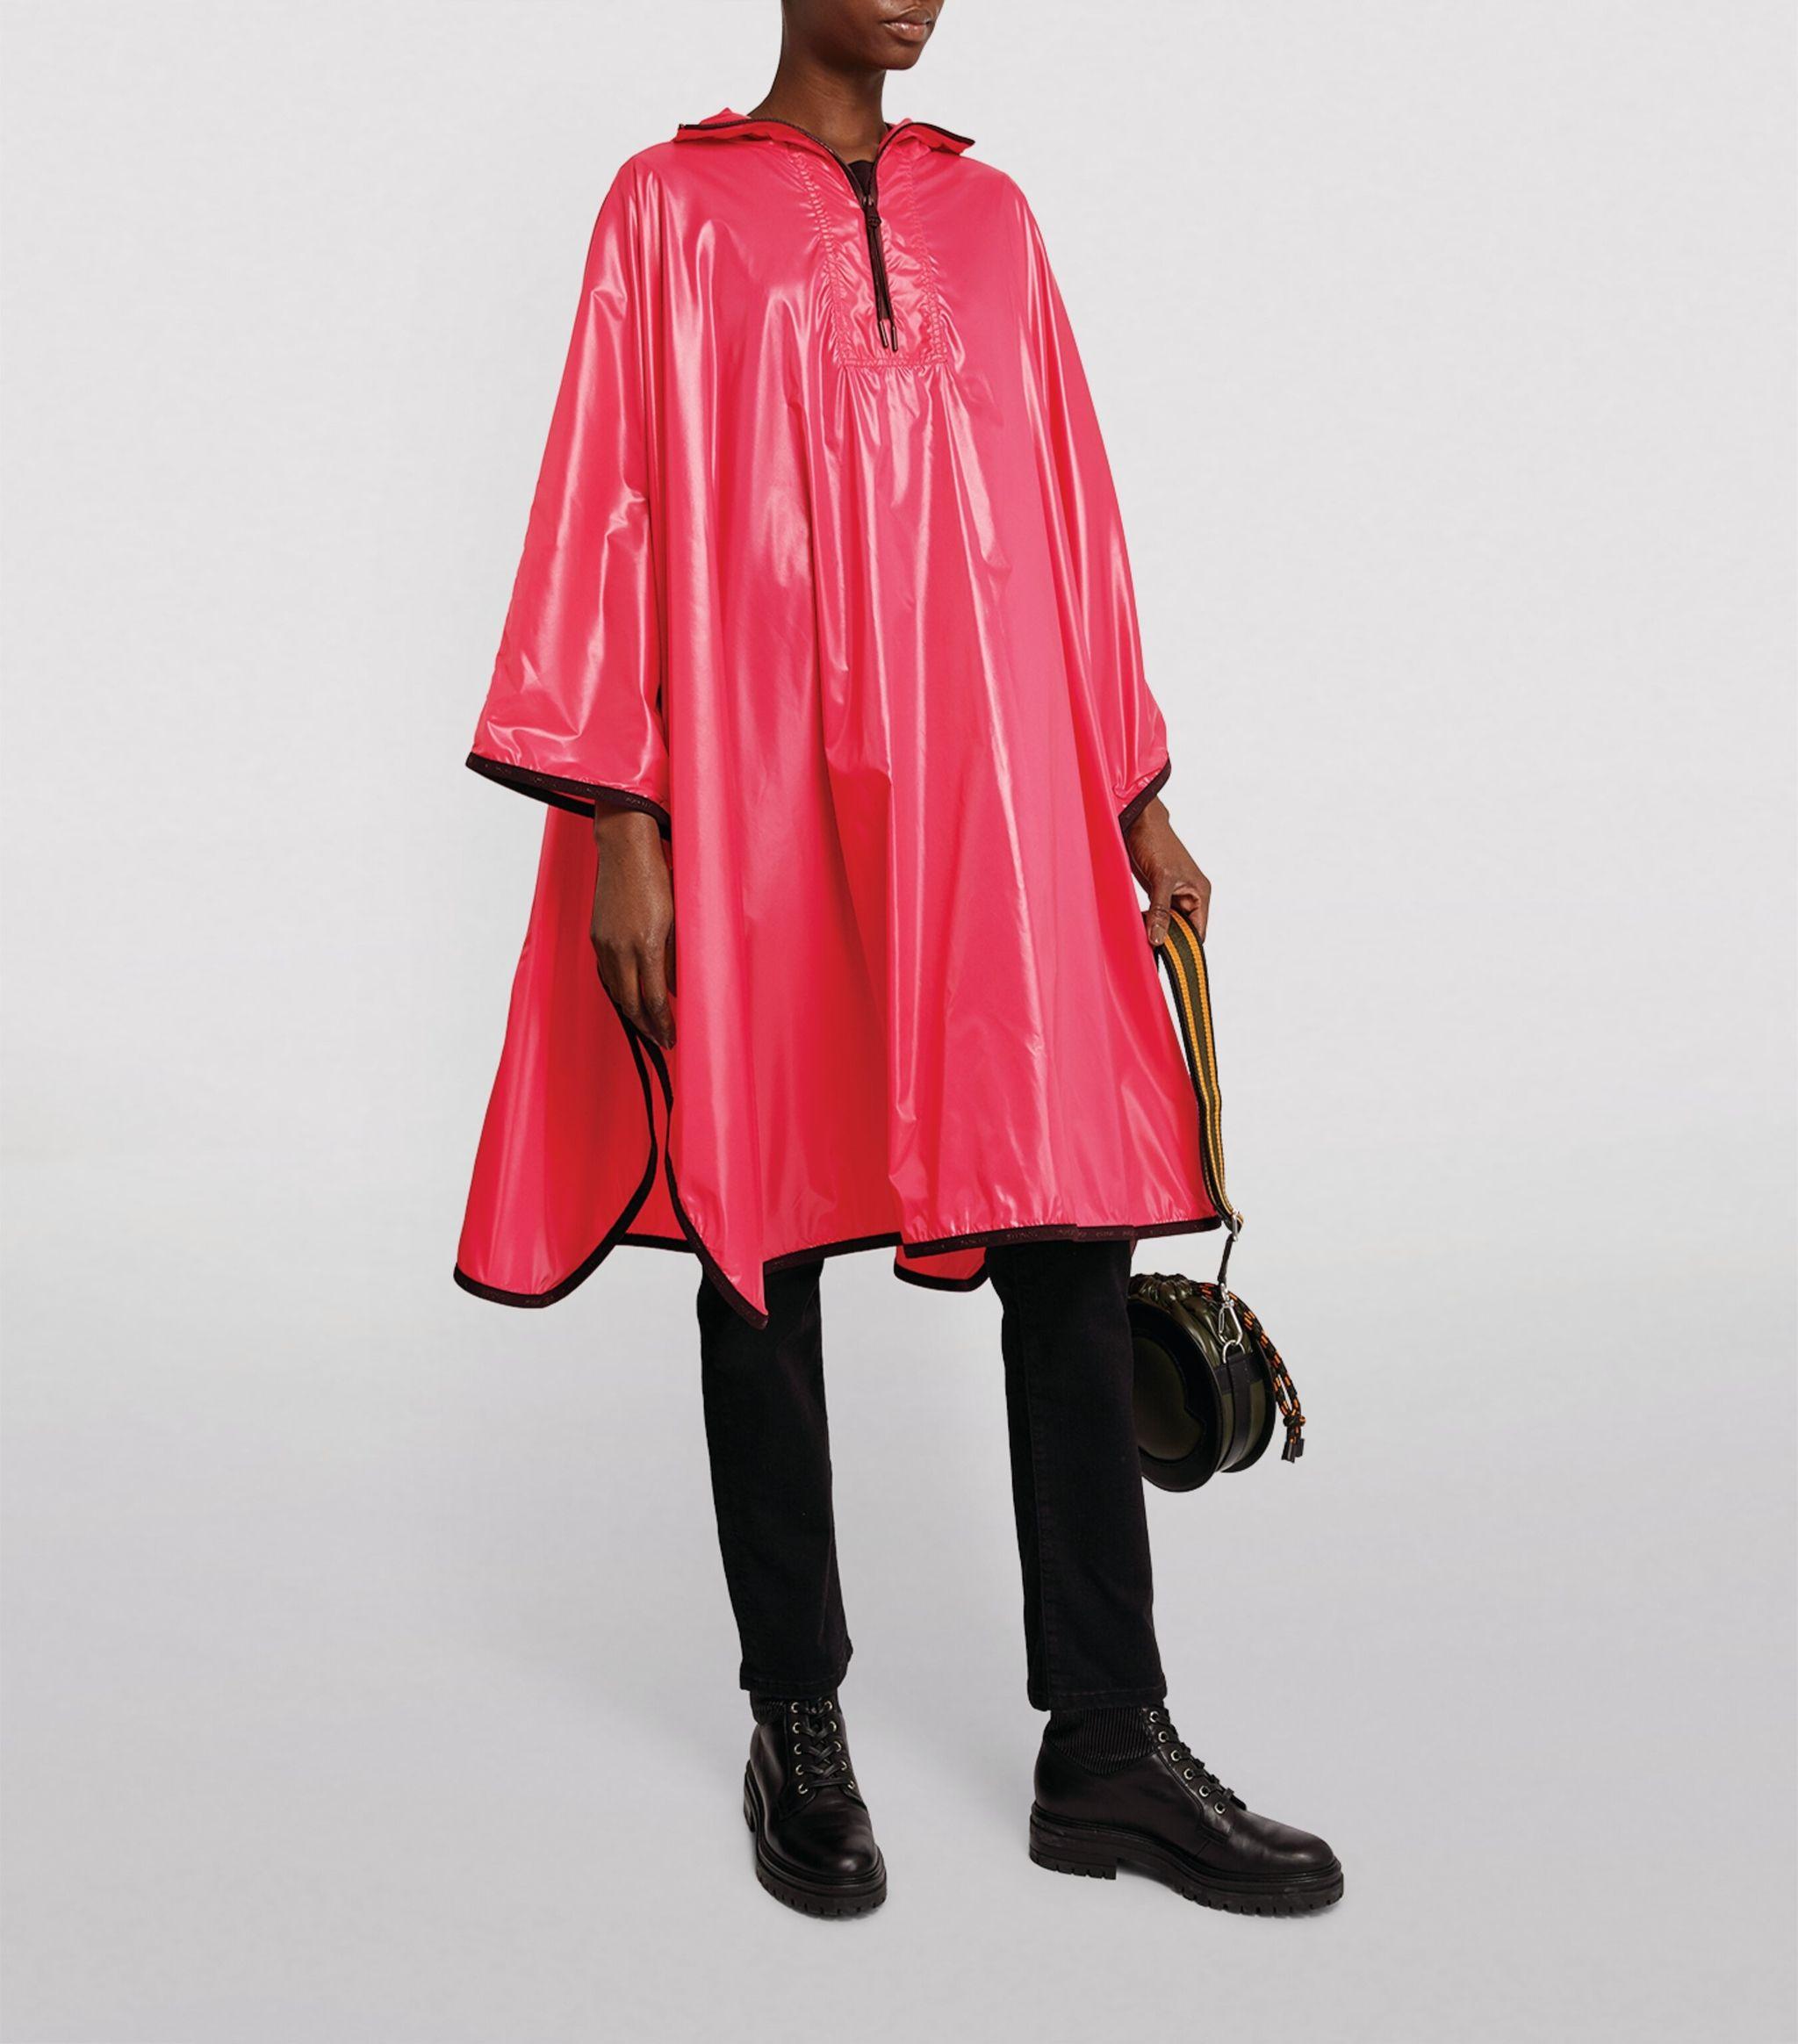 Moncler Synthetic Waterproof Poncho in Nude (Red) - Lyst